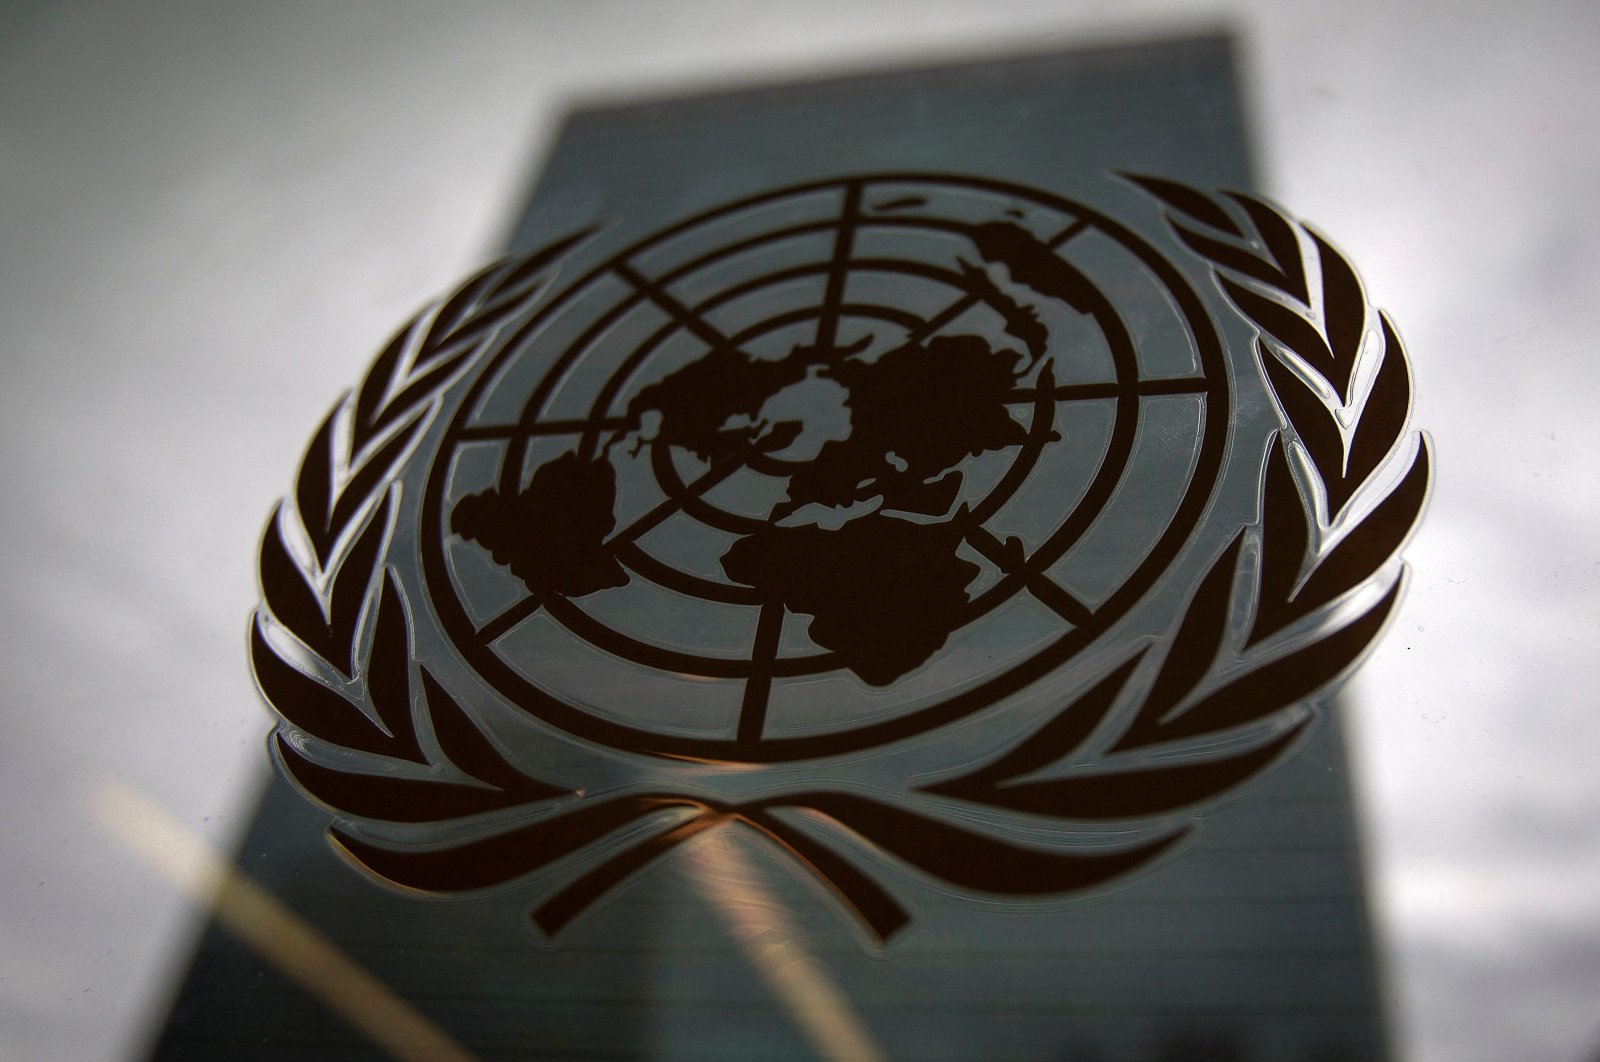 The United Nations headquarters building is pictured through a window with the U.N. logo in the foreground in the Manhattan borough of New York, U.S., Aug. 15, 2014. (Reuters Photo)